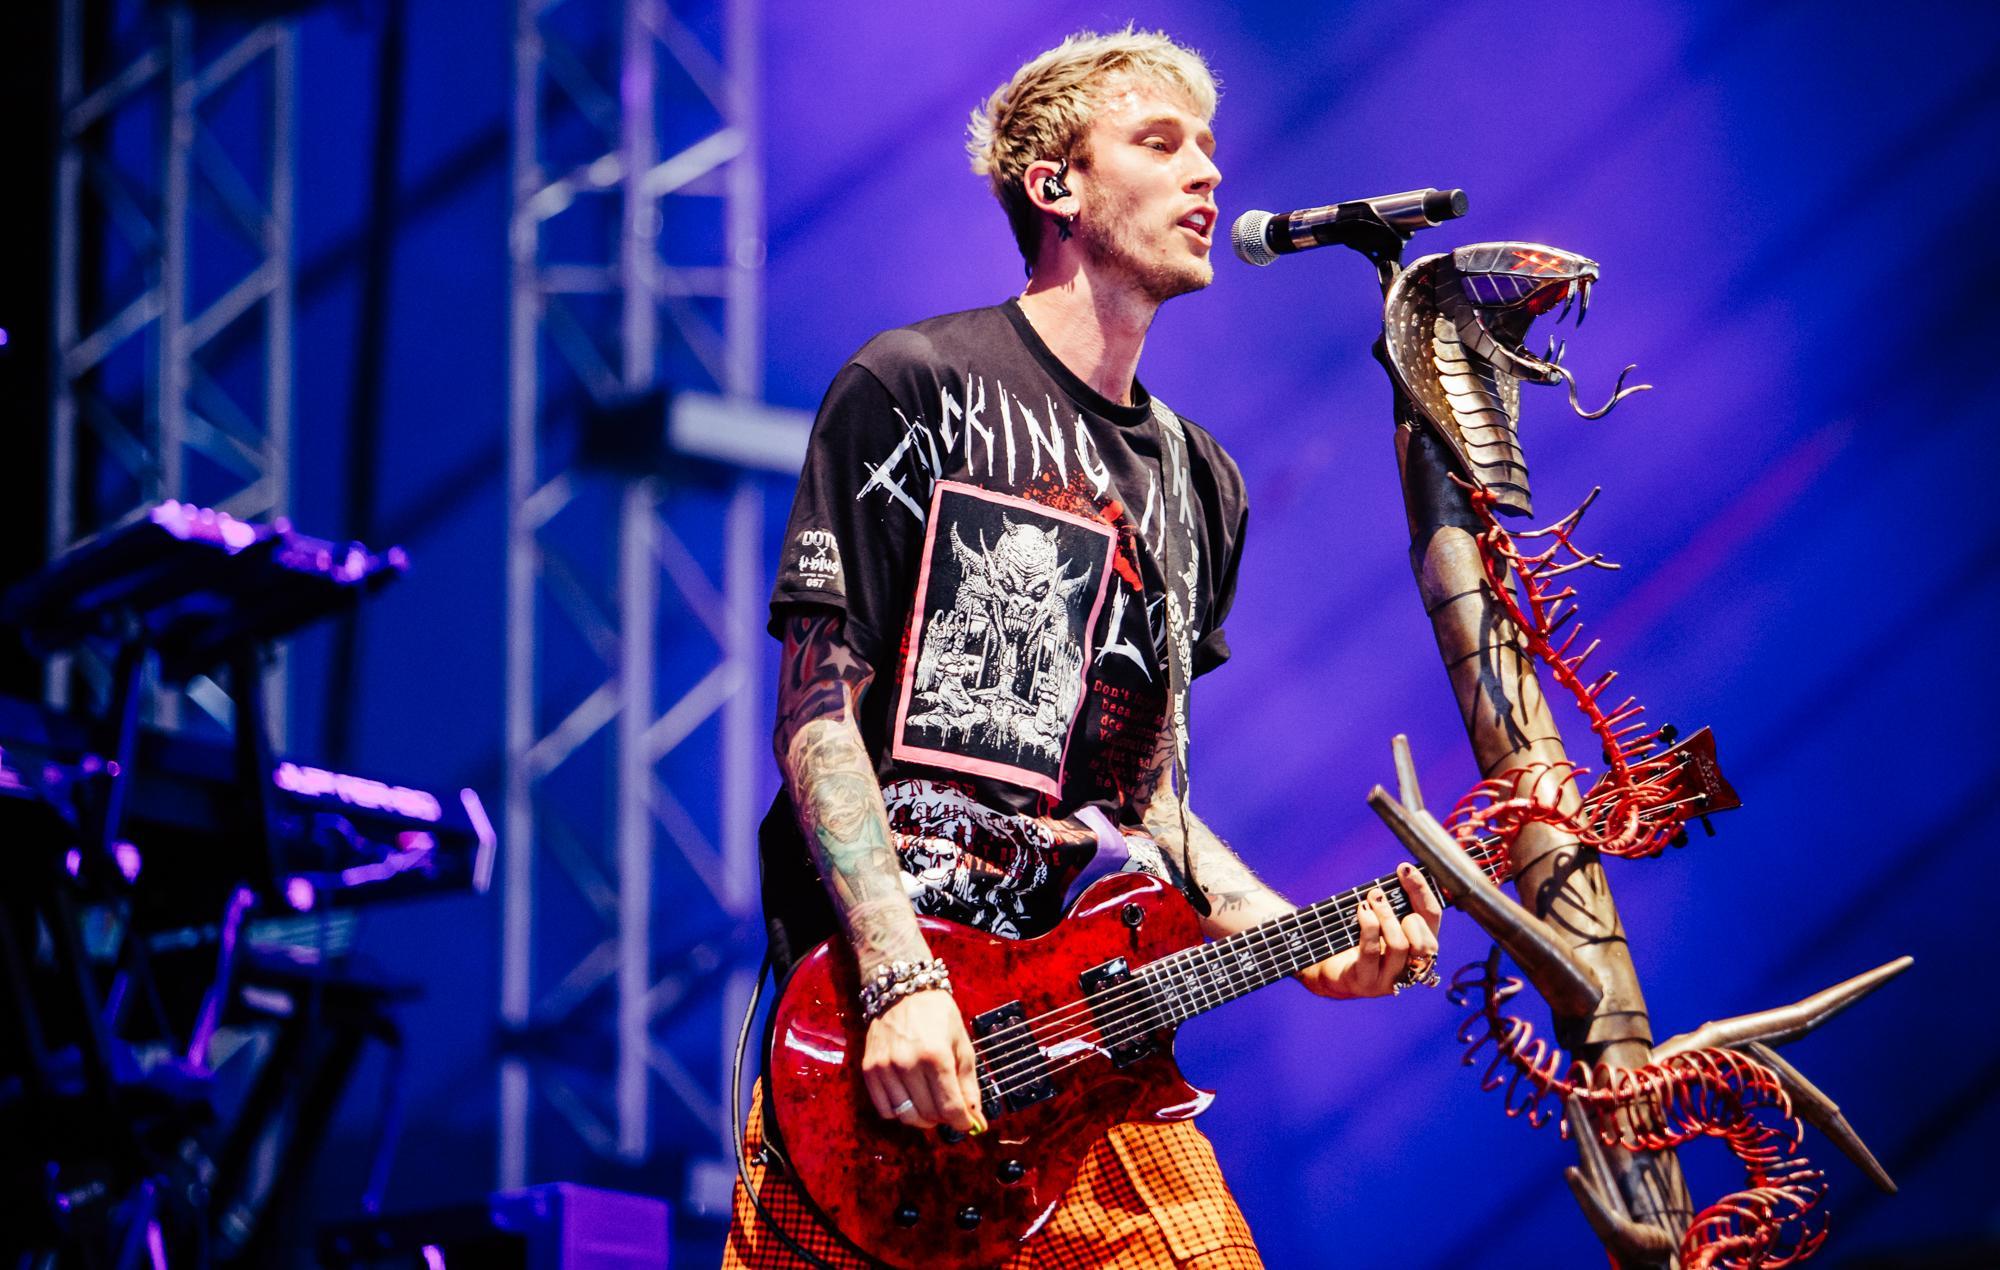 Watch Machine Gun Kelly perform with fans on the balcony